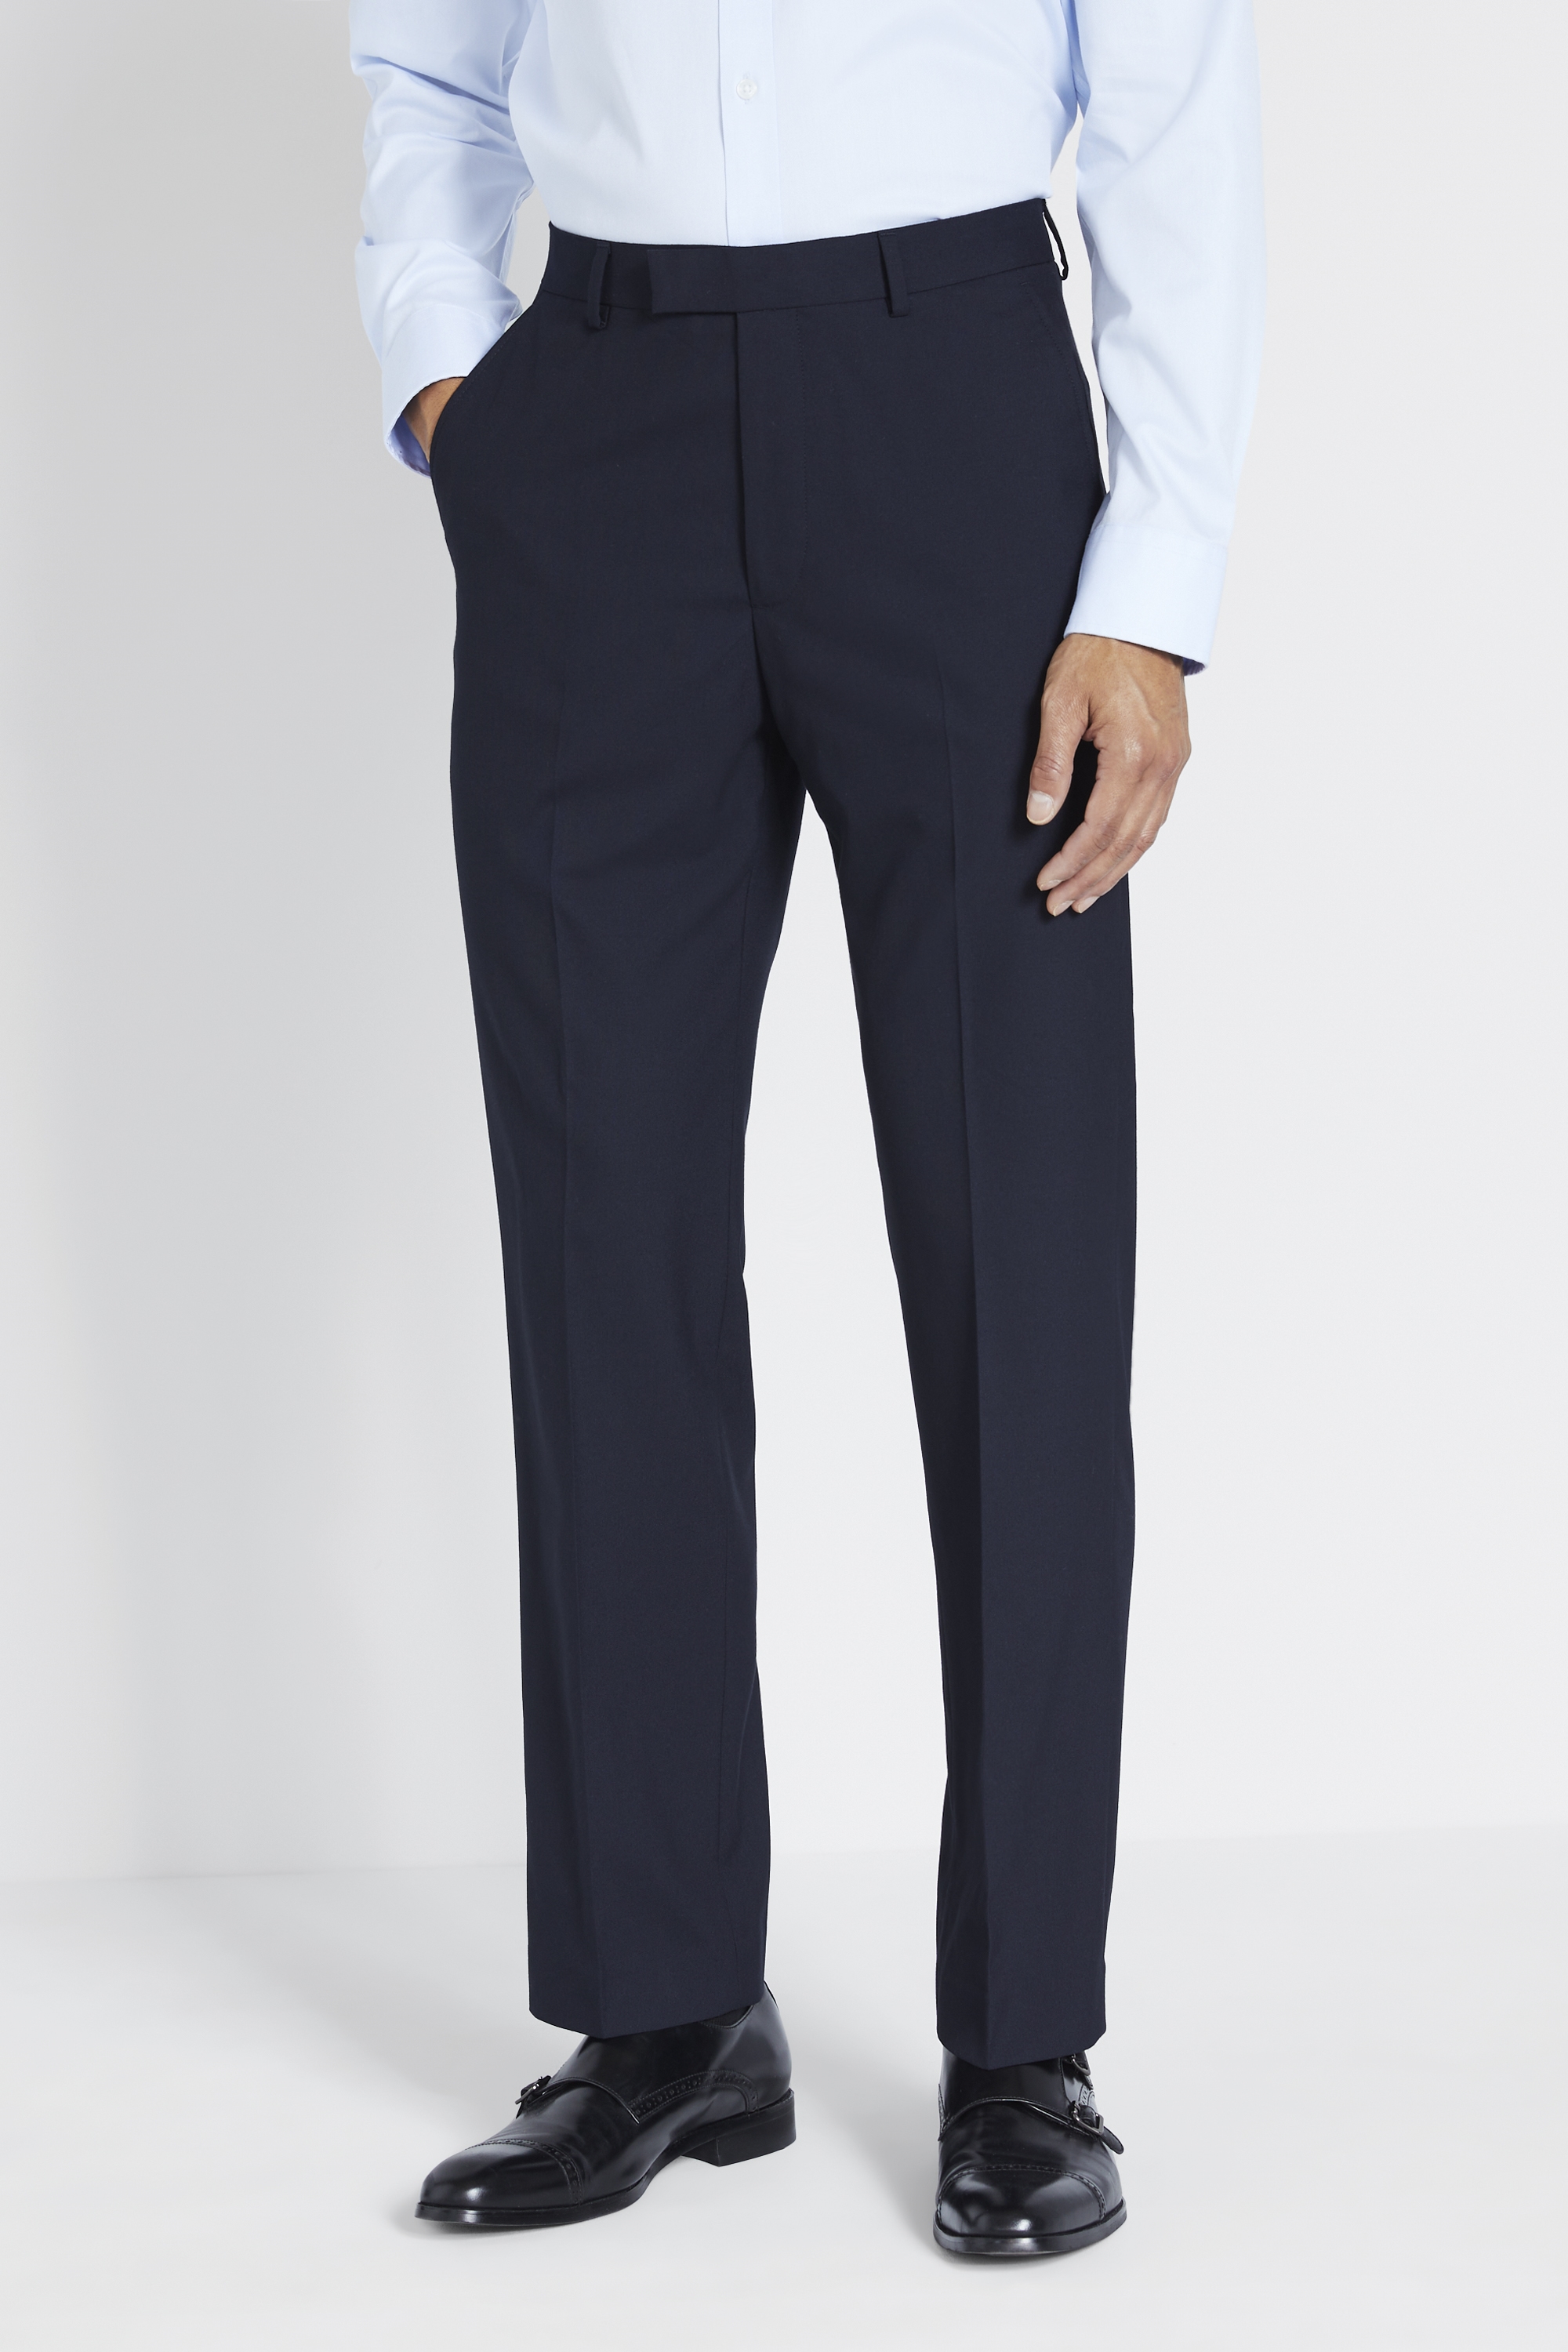 Regular Fit Navy Trousers | Buy Online at Moss